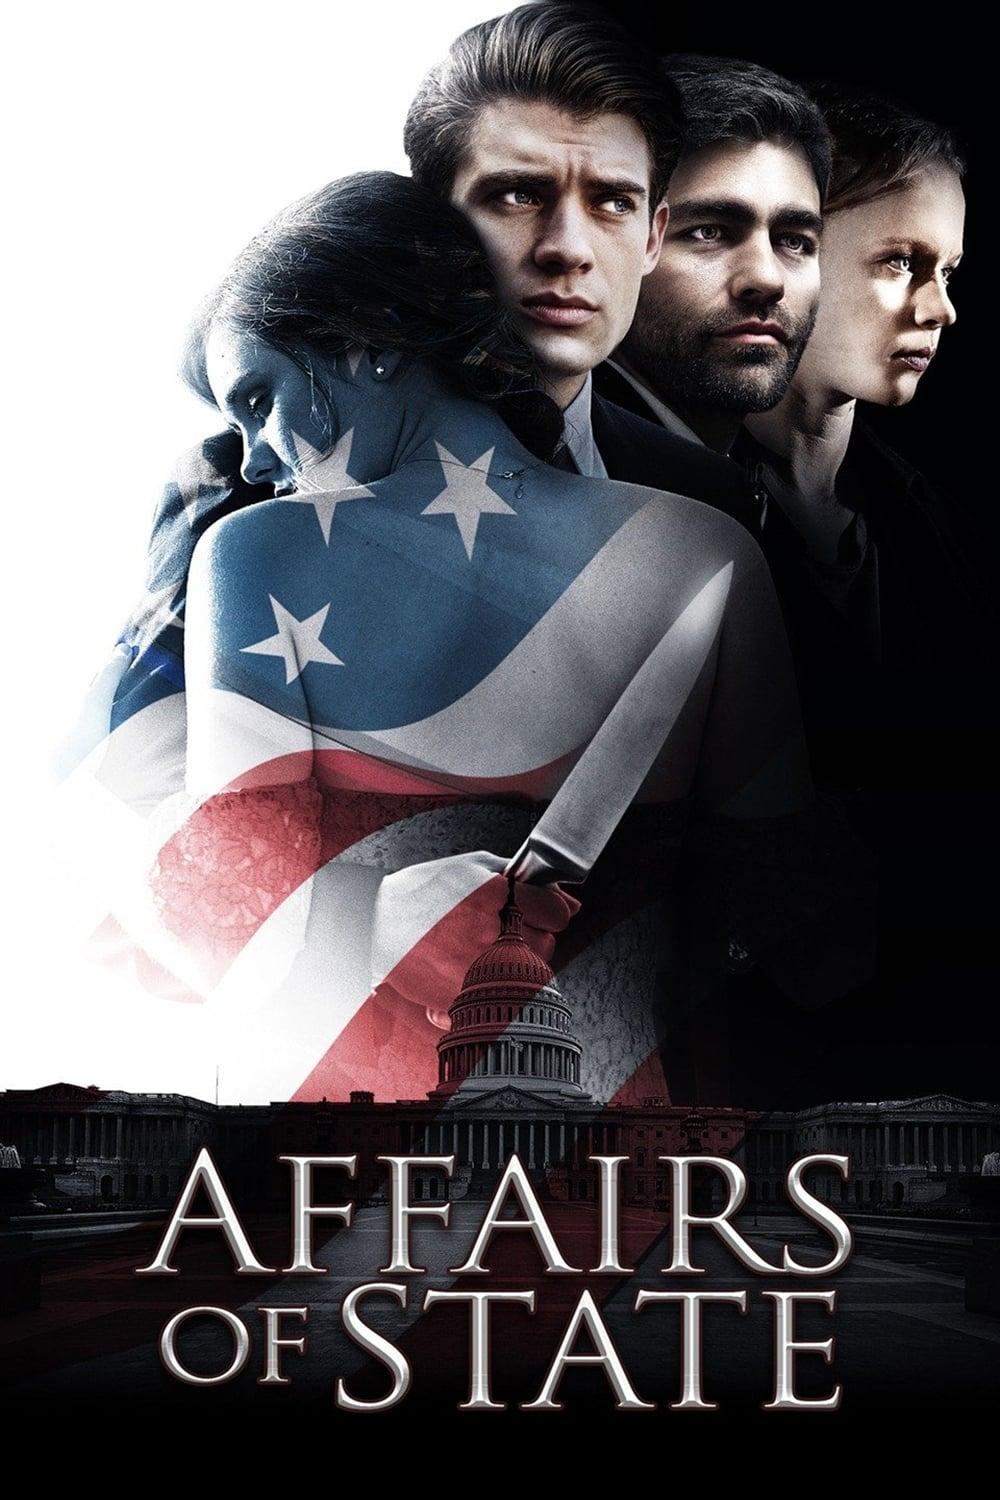 Affairs of State poster